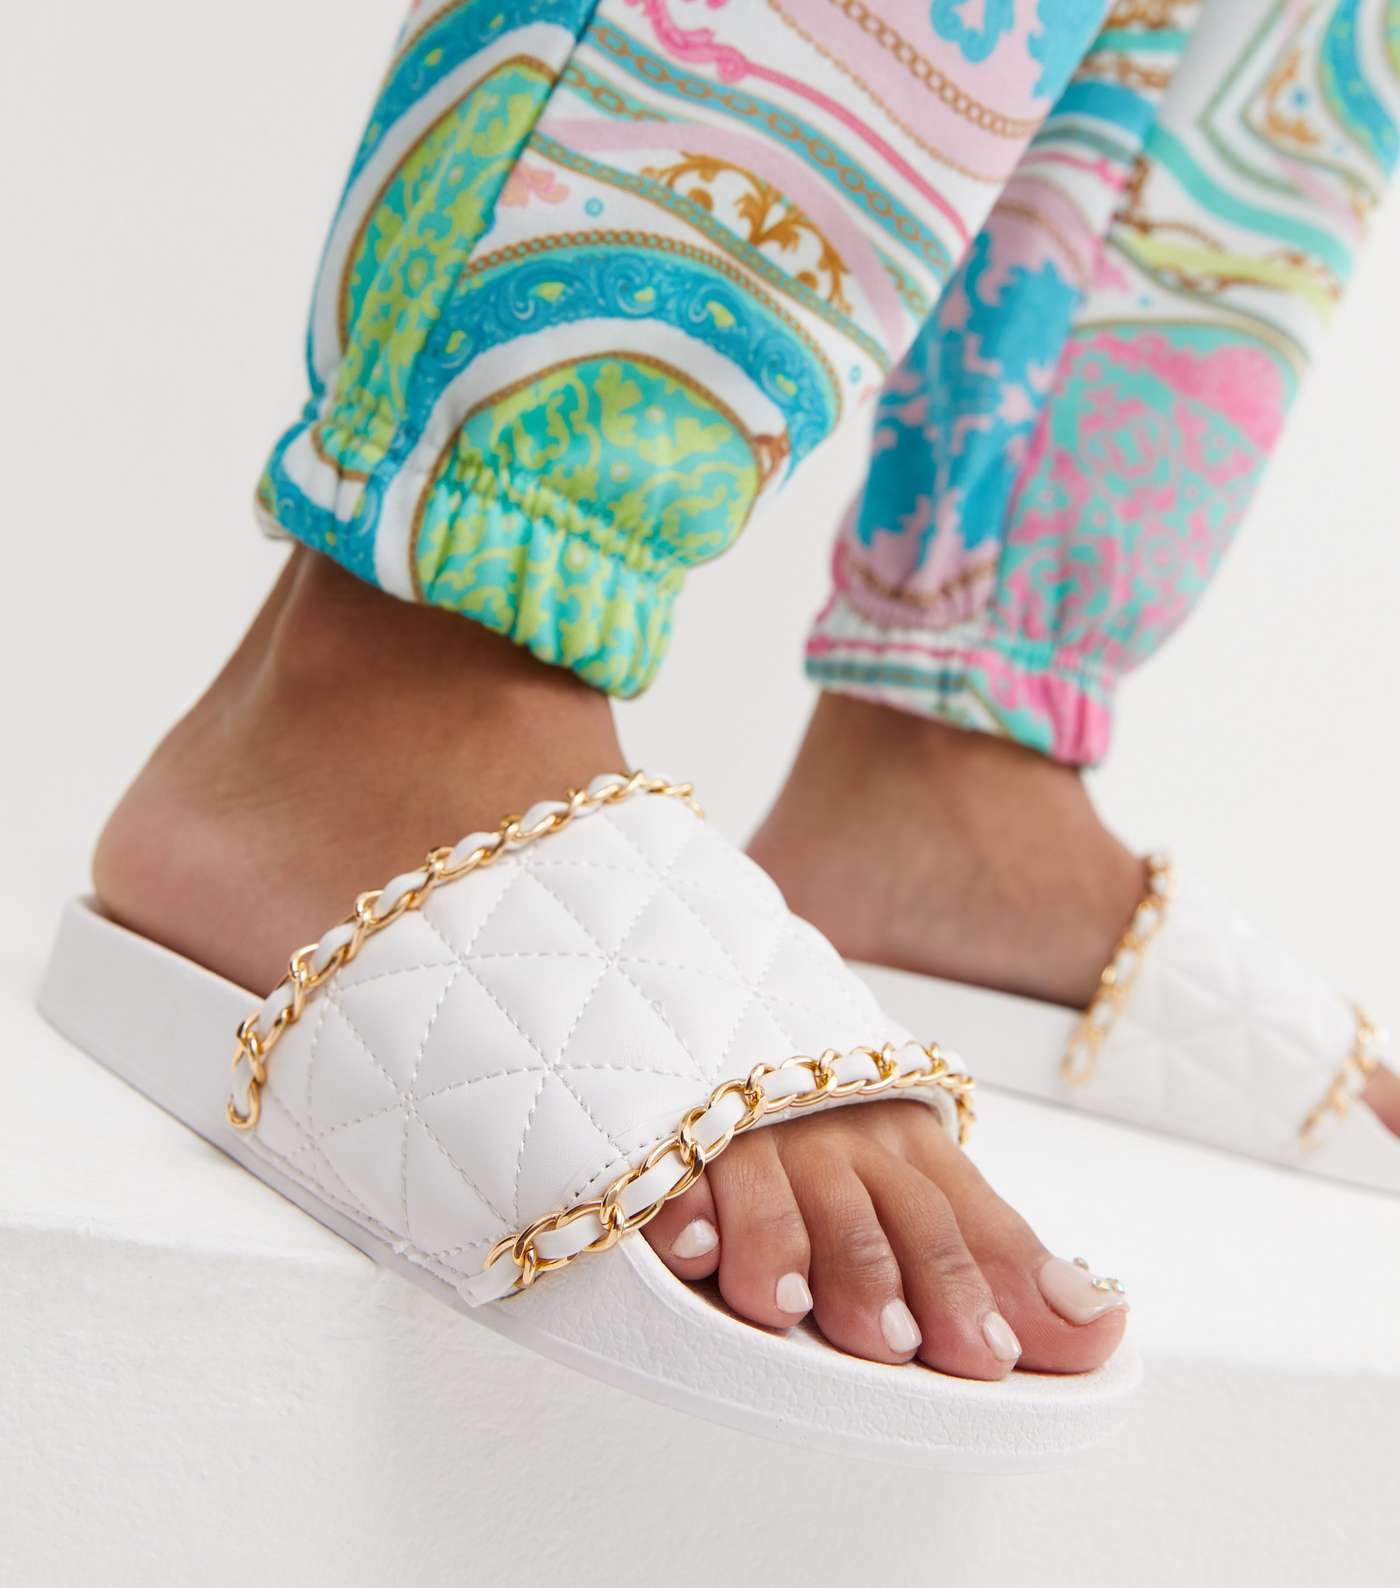 Bon Voyage White Leather-Look Chain Sliders